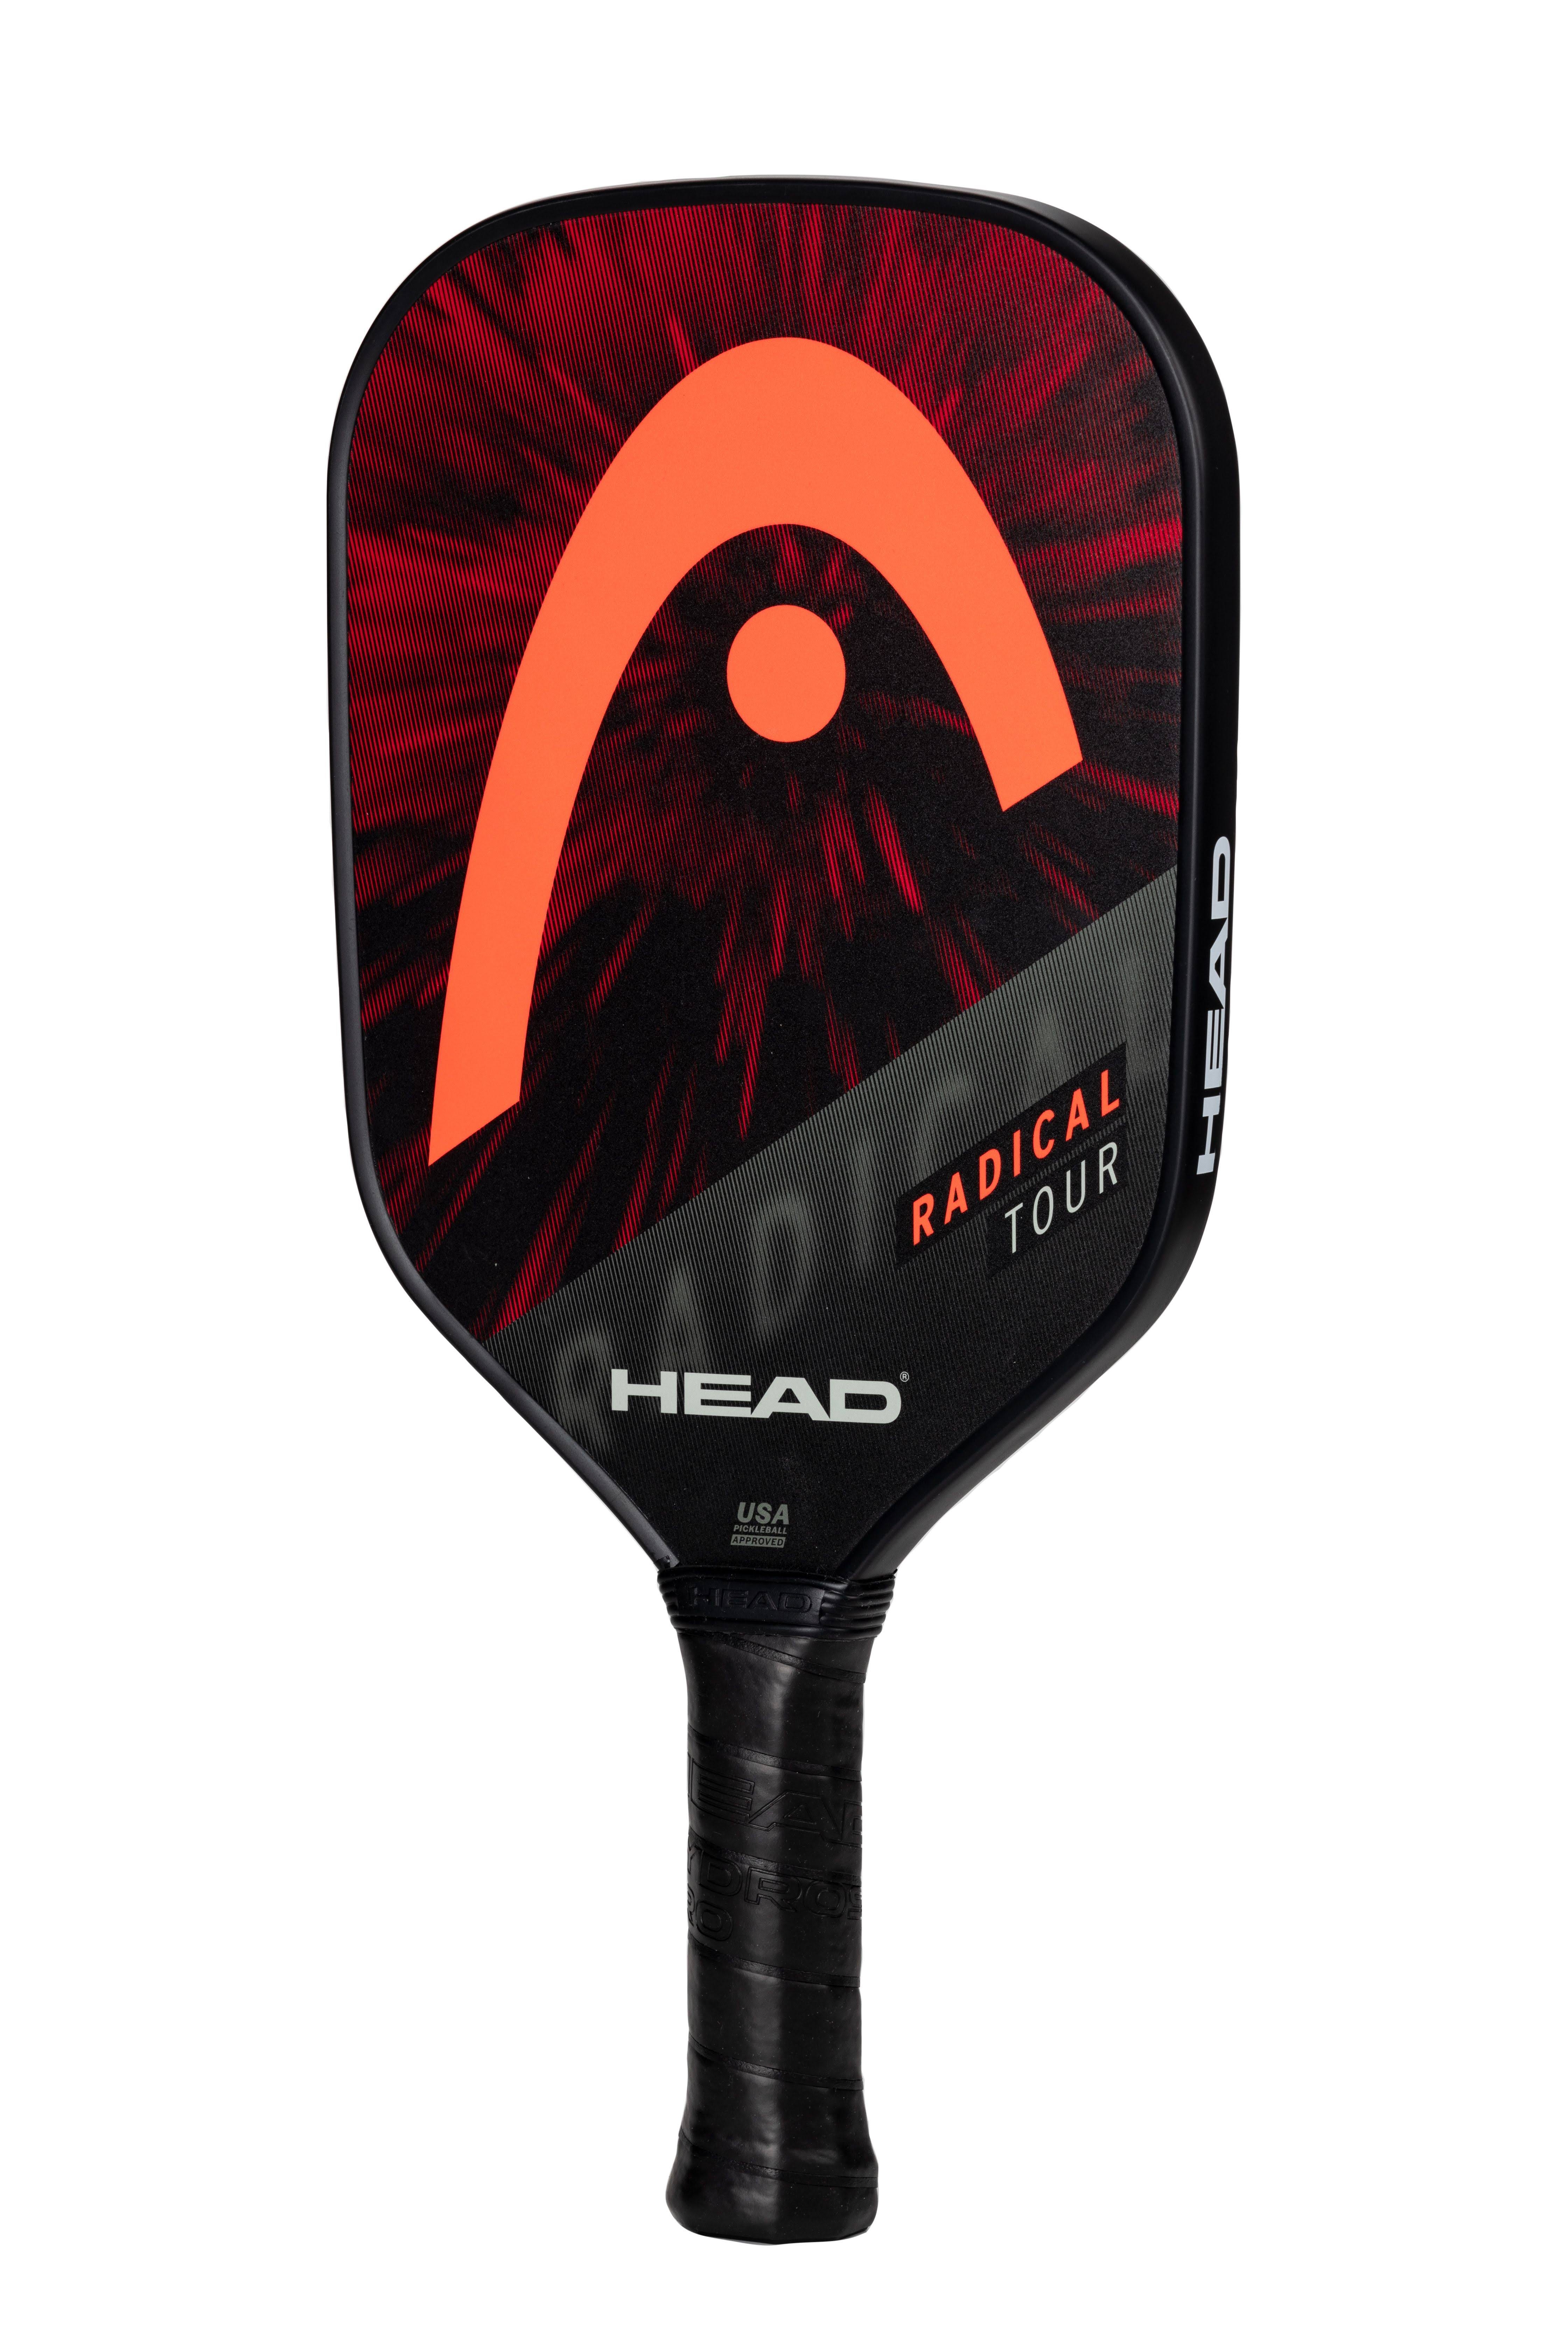 Head Radical Tour Pickleball Paddle - The Perfect Pickleball Gift | Image